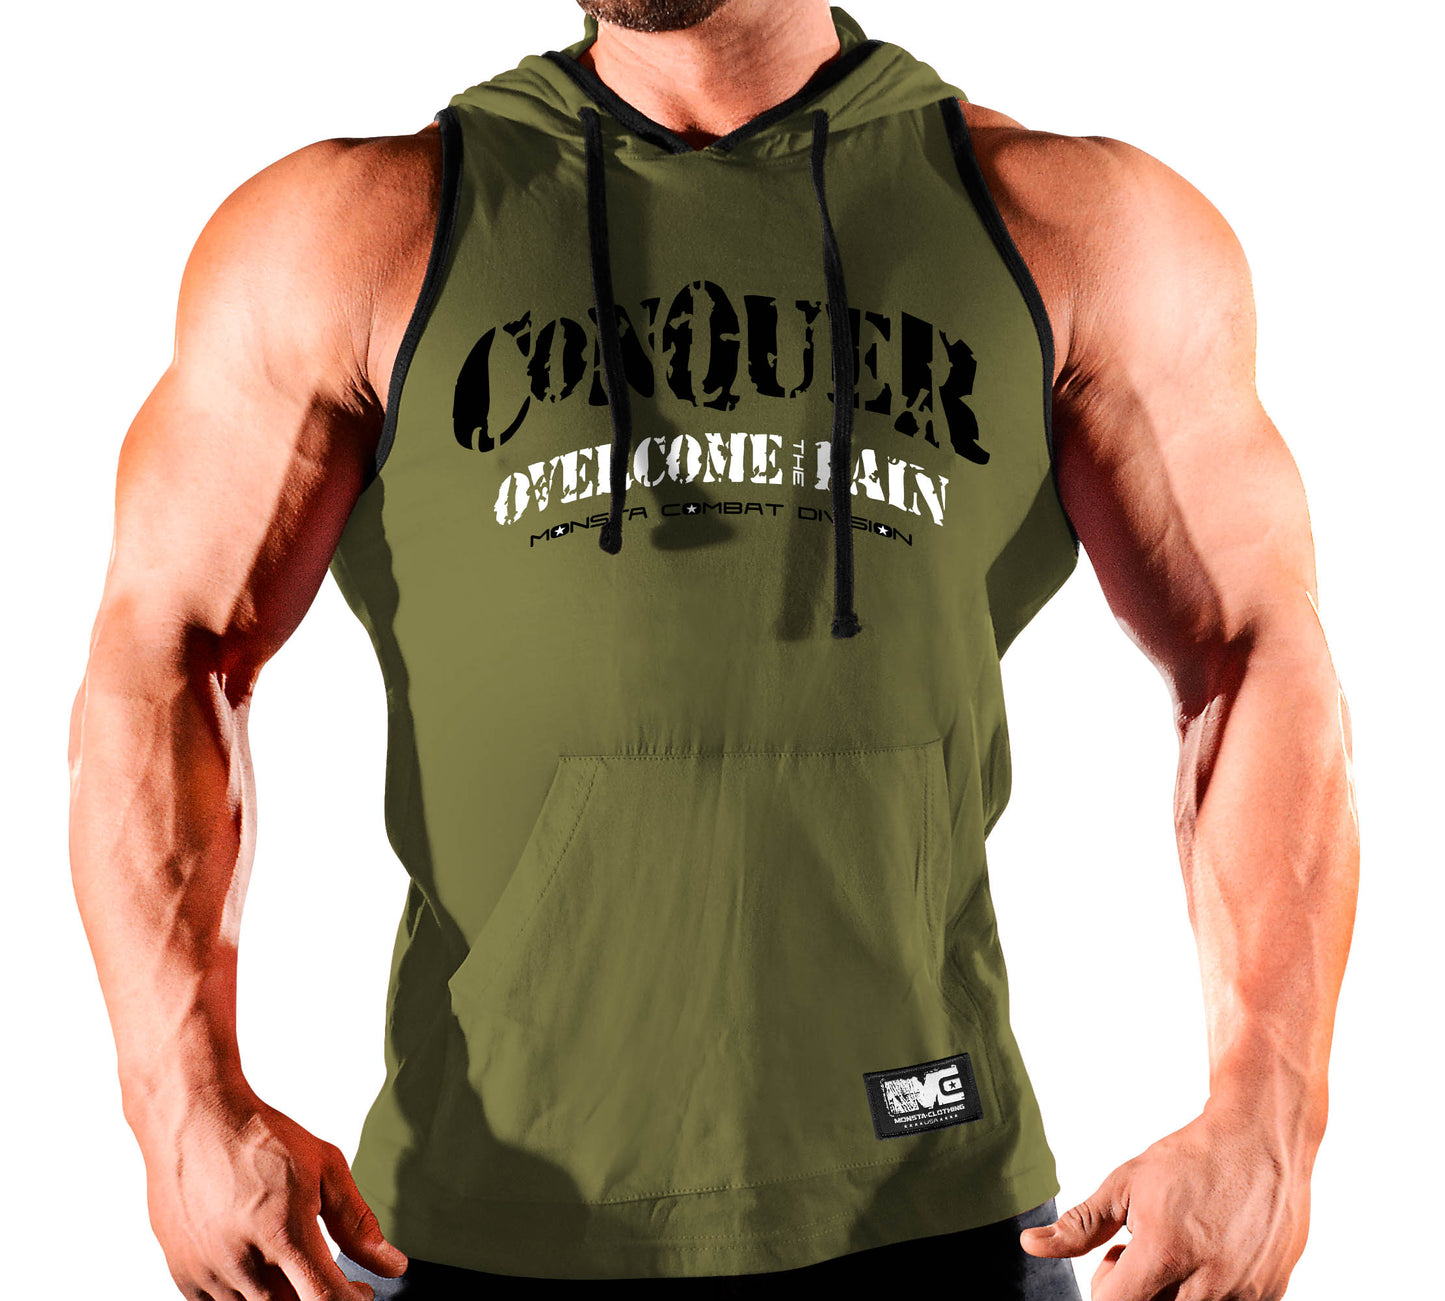 CONQUER-Overcome the Pain-137: BK-WT